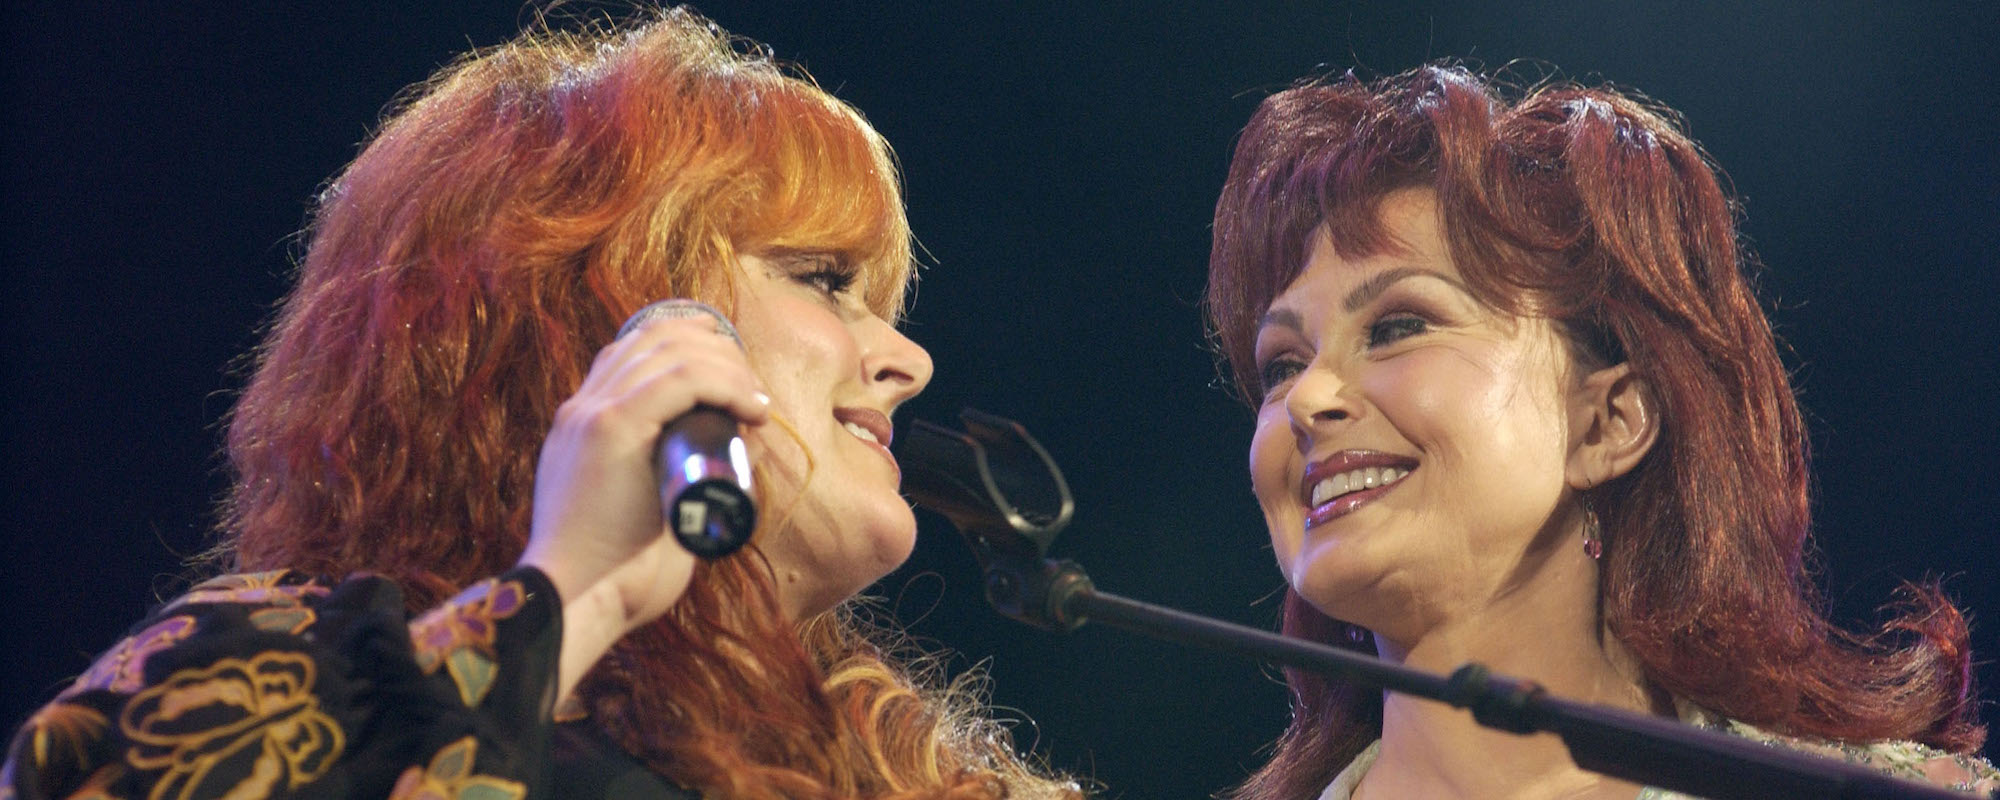 The Universal Meaning and “Farewell” Behind The Judds’ 1990 Hit “Love Can Build a Bridge”